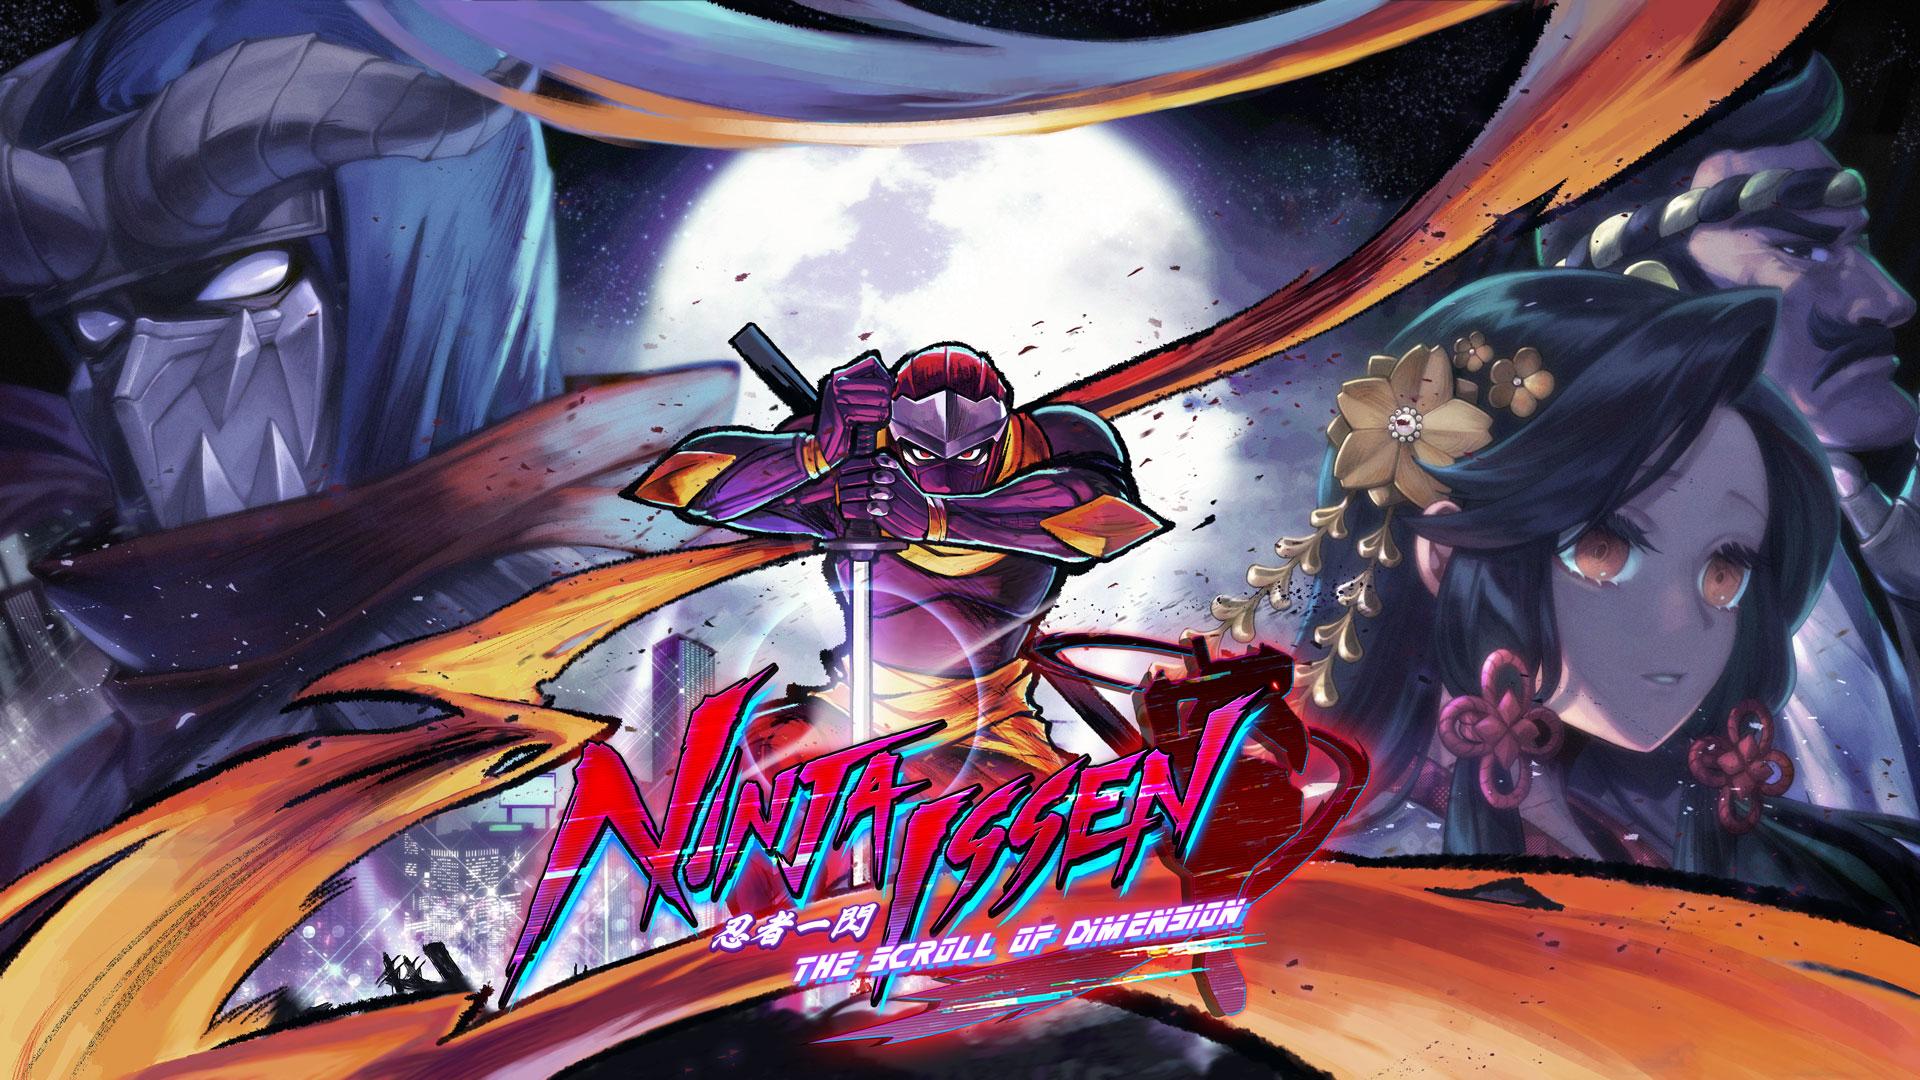 Ninja Issen playable demo is now available on PC